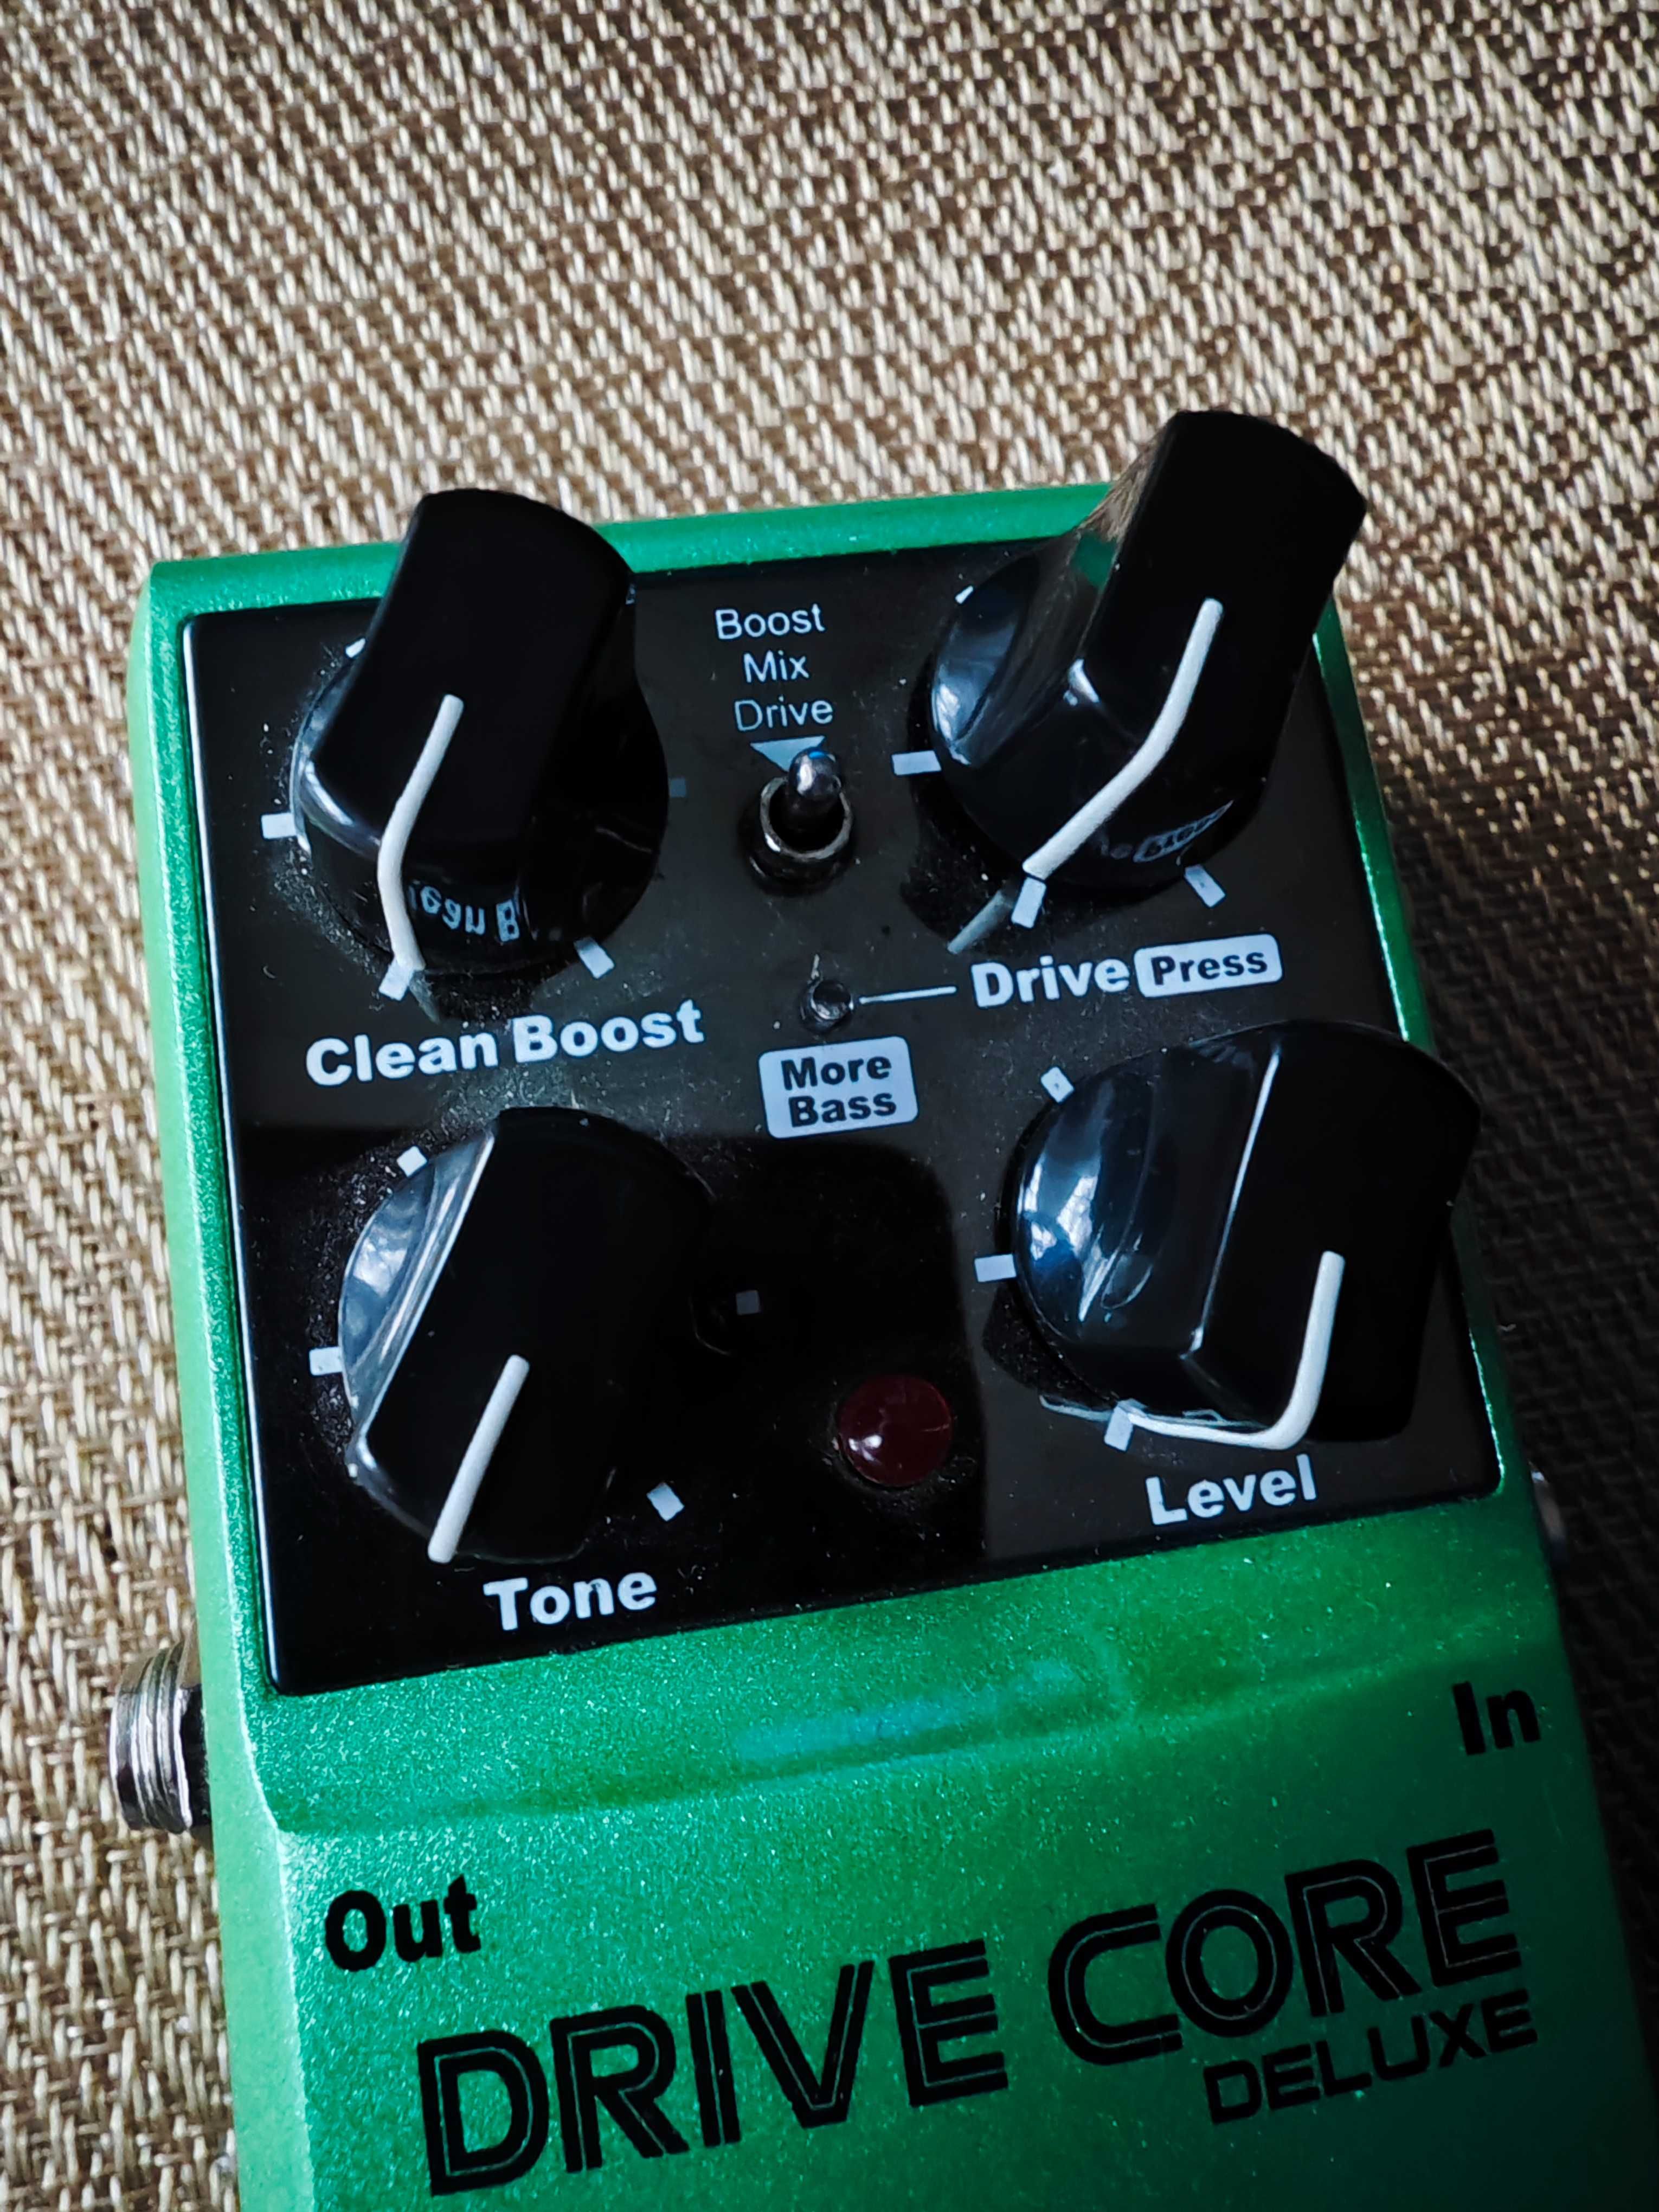 Overdrive NUX Drive Core Deluxe